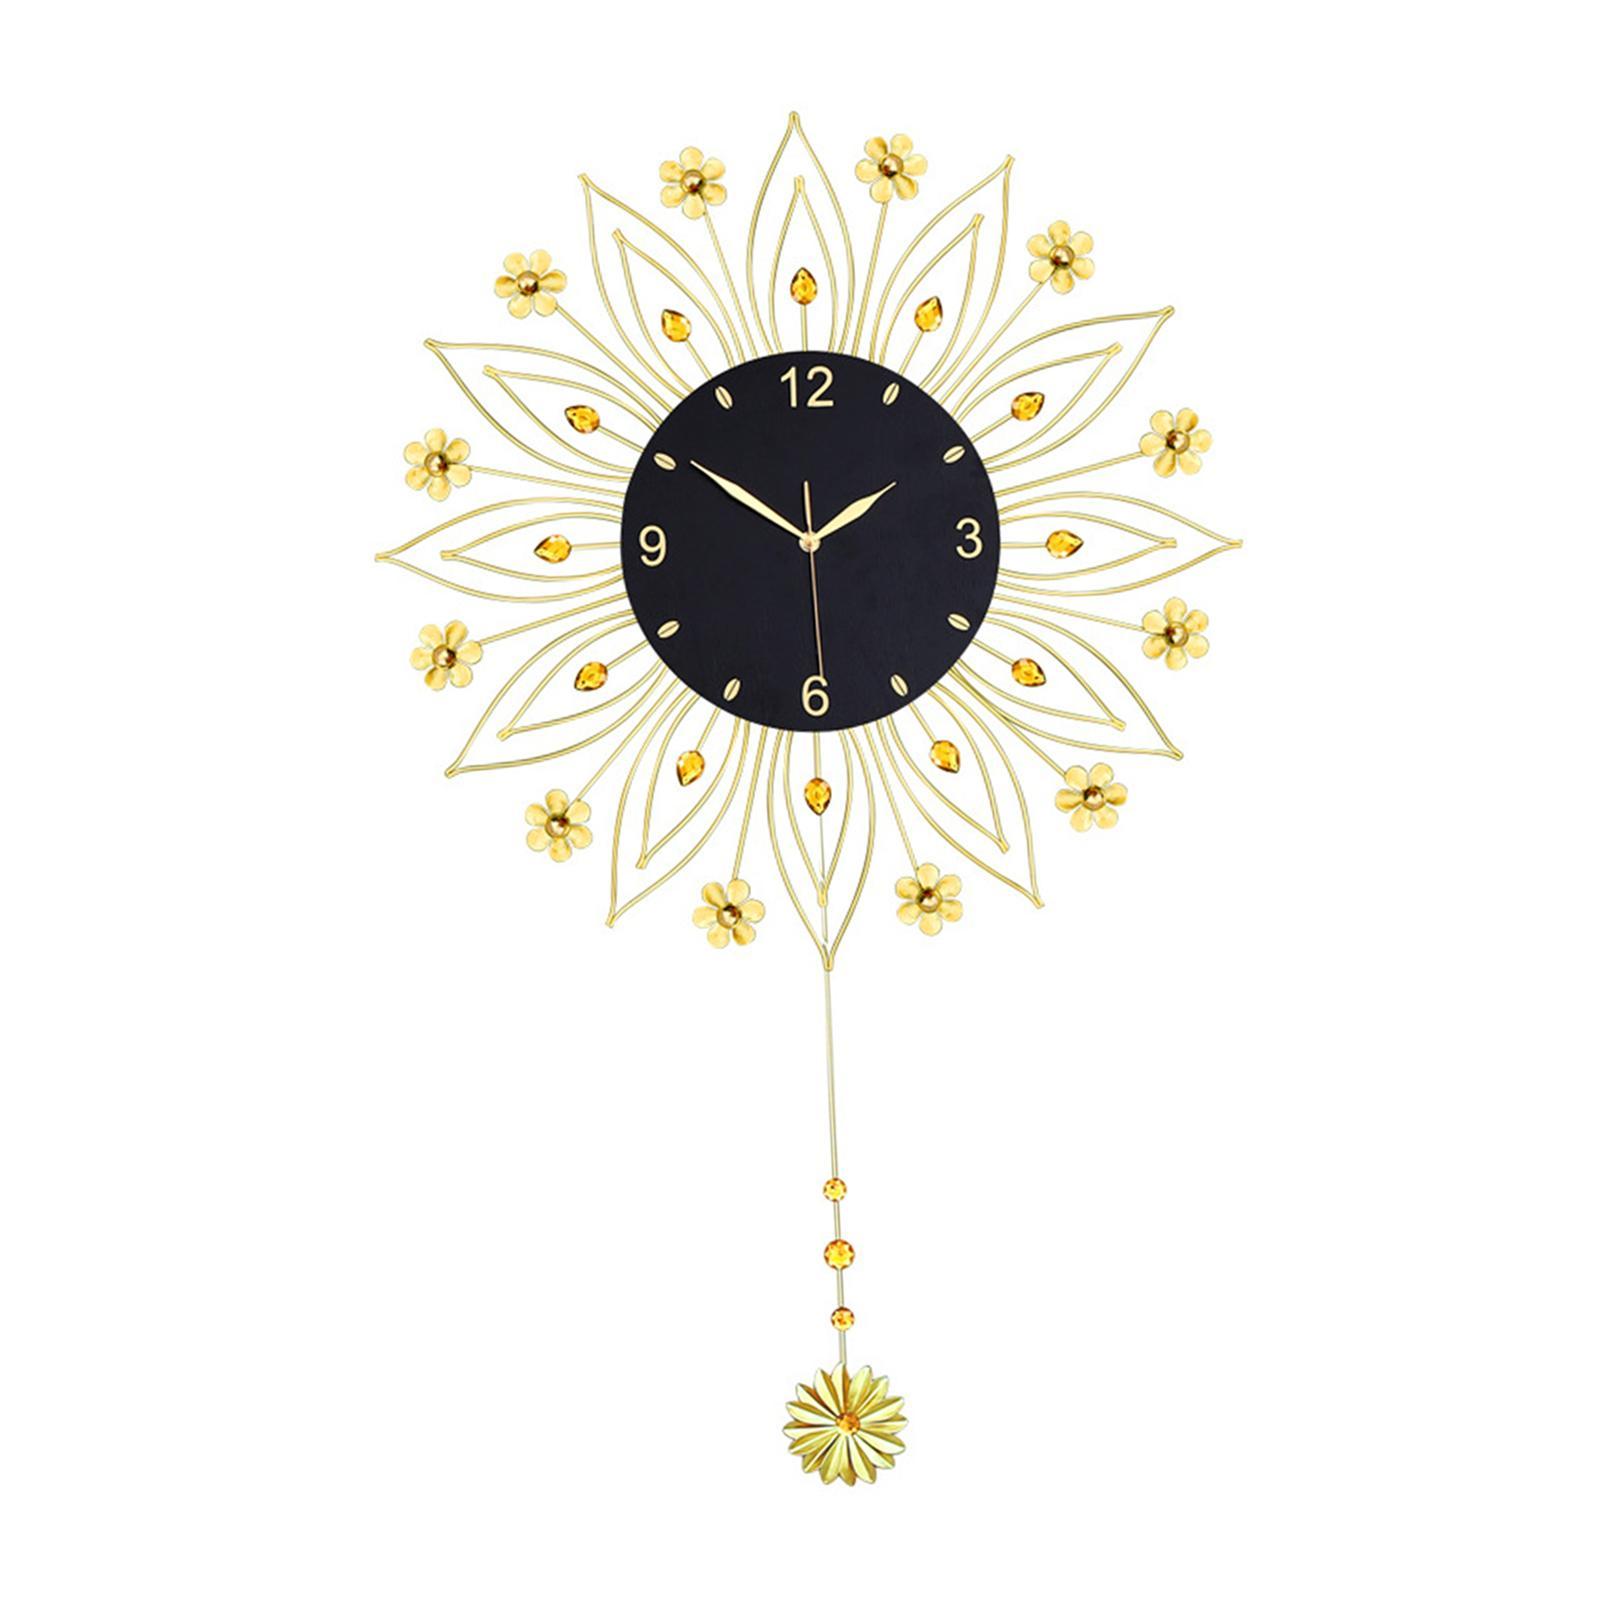 Modern Wall Clock Non Ticking Clock Metal Fashion for Office Bedroom Home